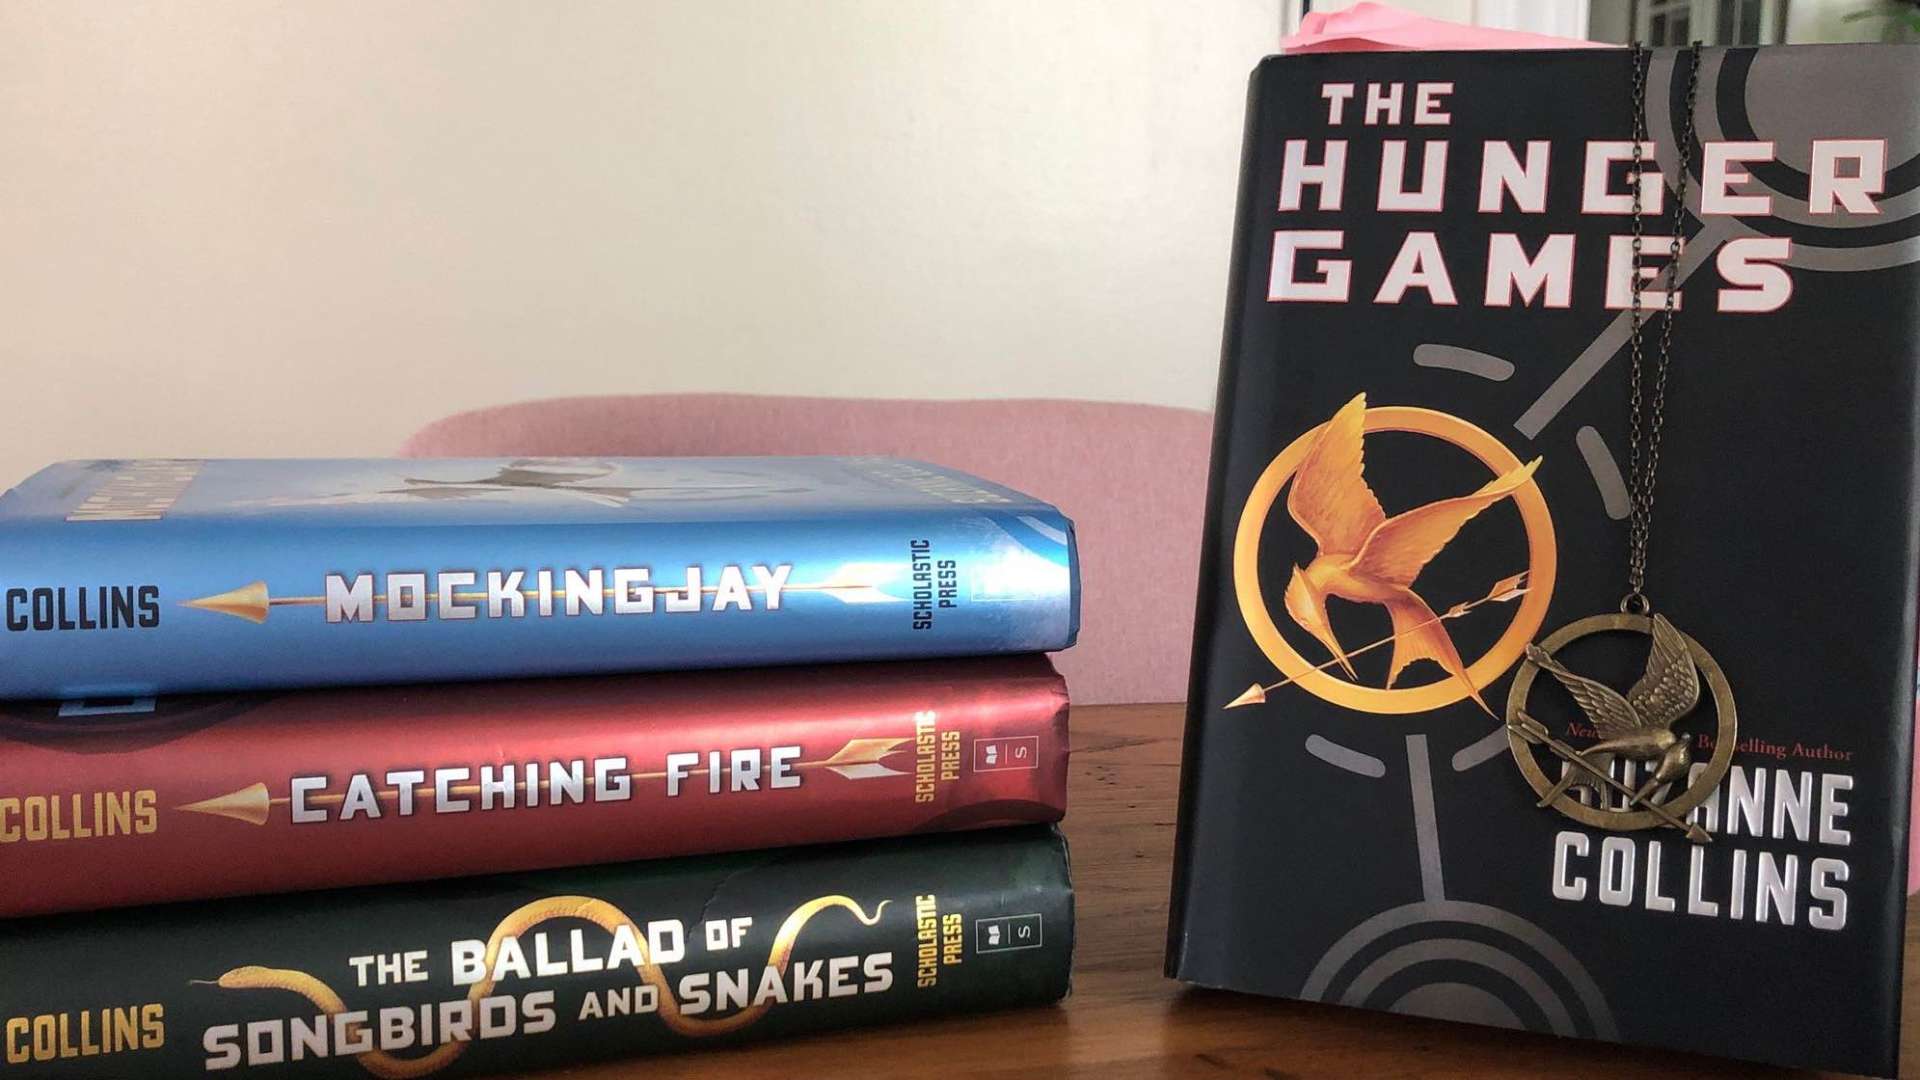 The Hunger Games – The English Bookshop